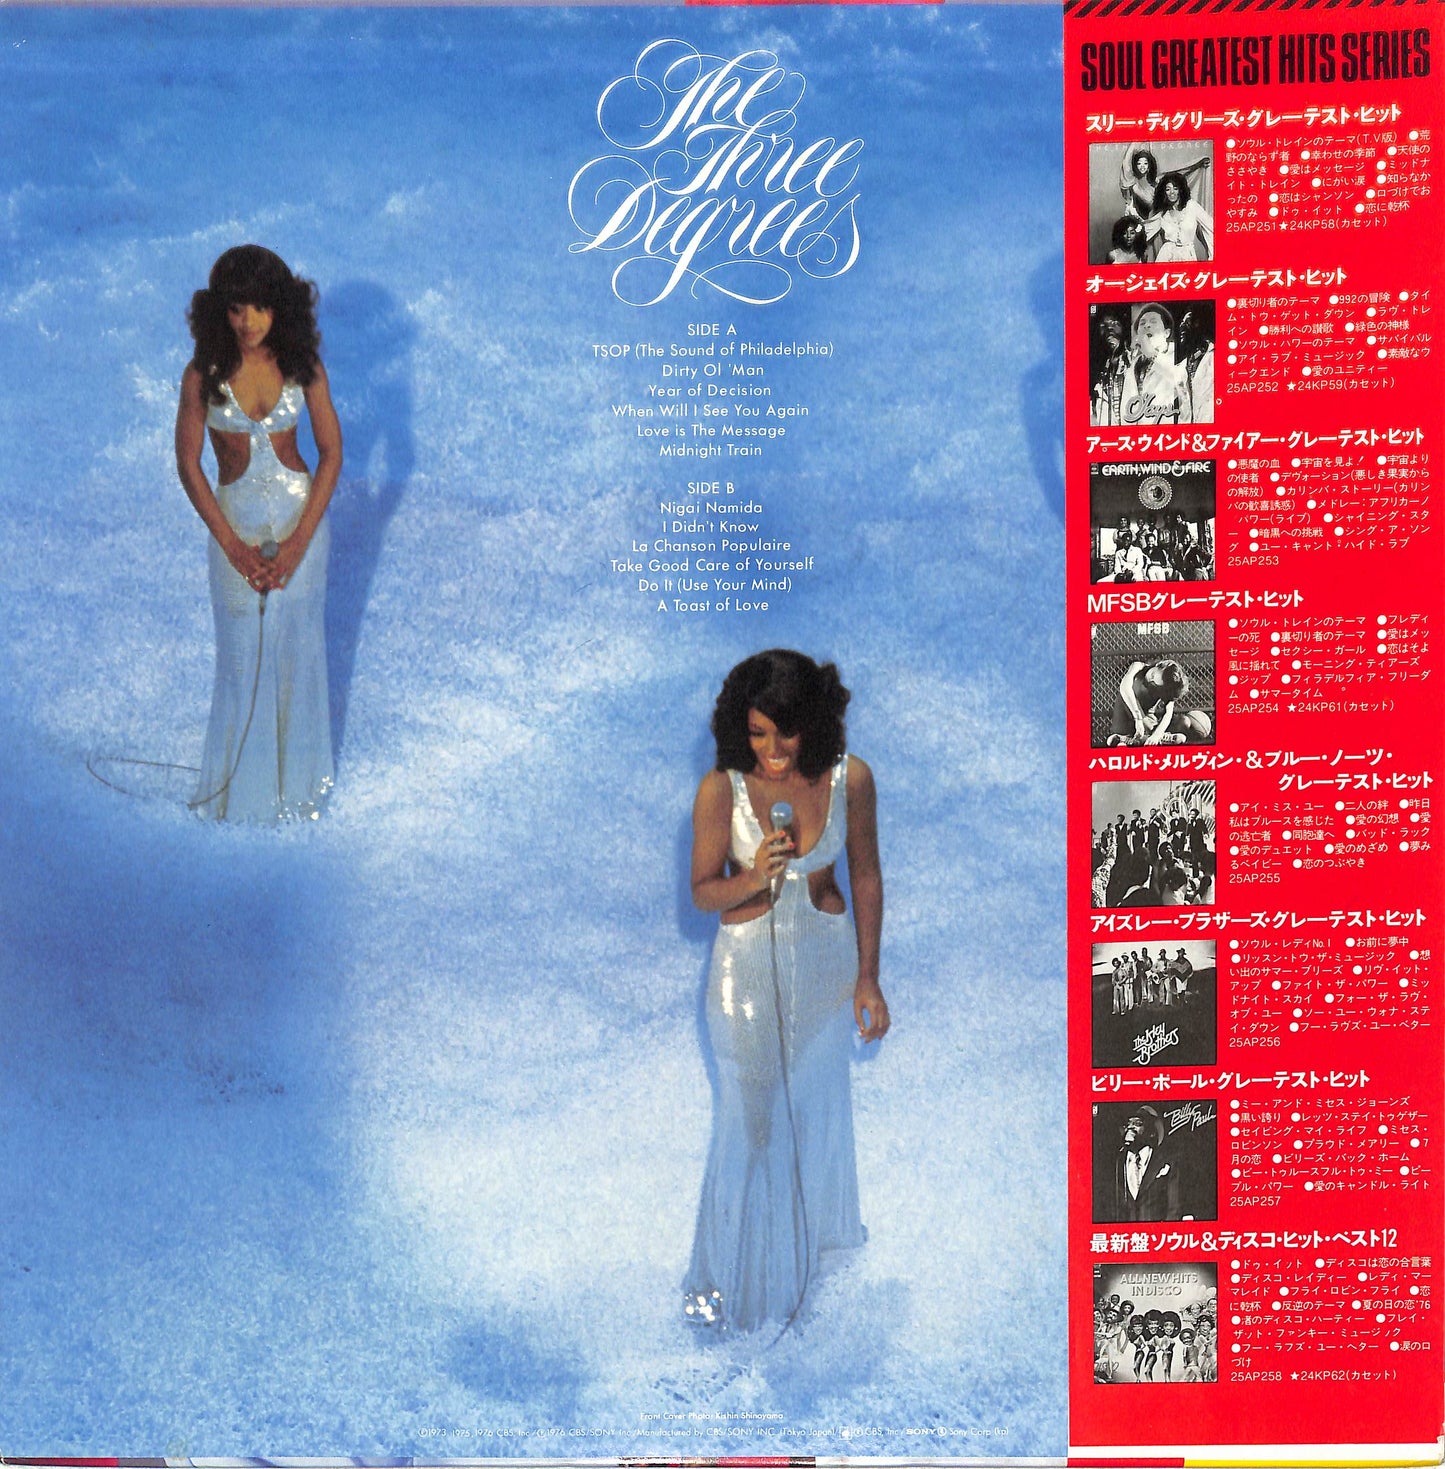 THE THREE DEGREES - Soul Greatest Hits Series